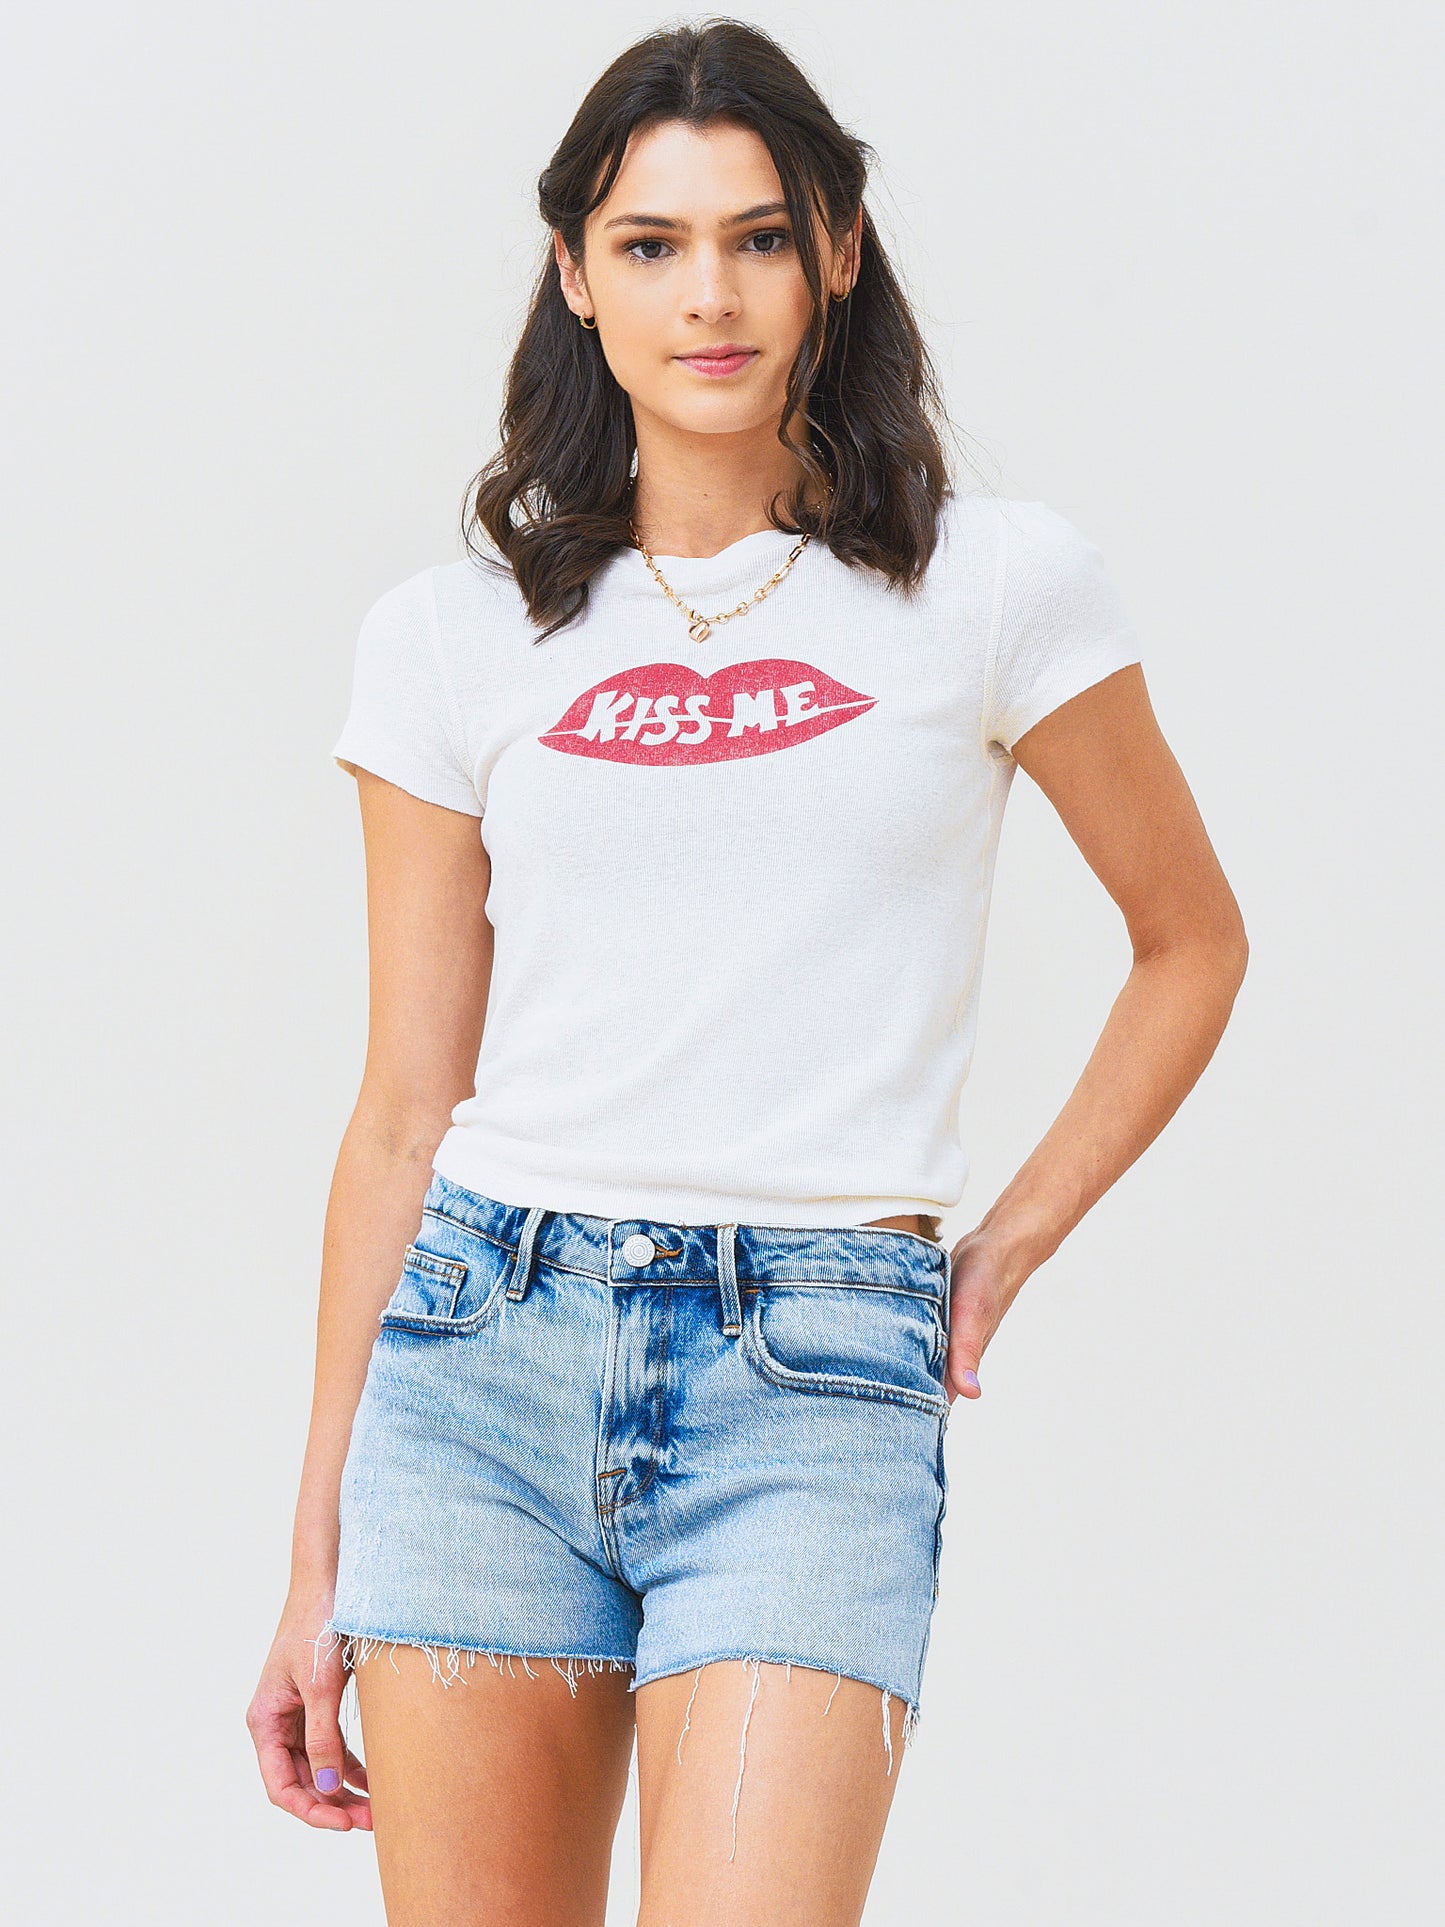 Re/Done Women's 90s "Kiss Me" Baby Tee